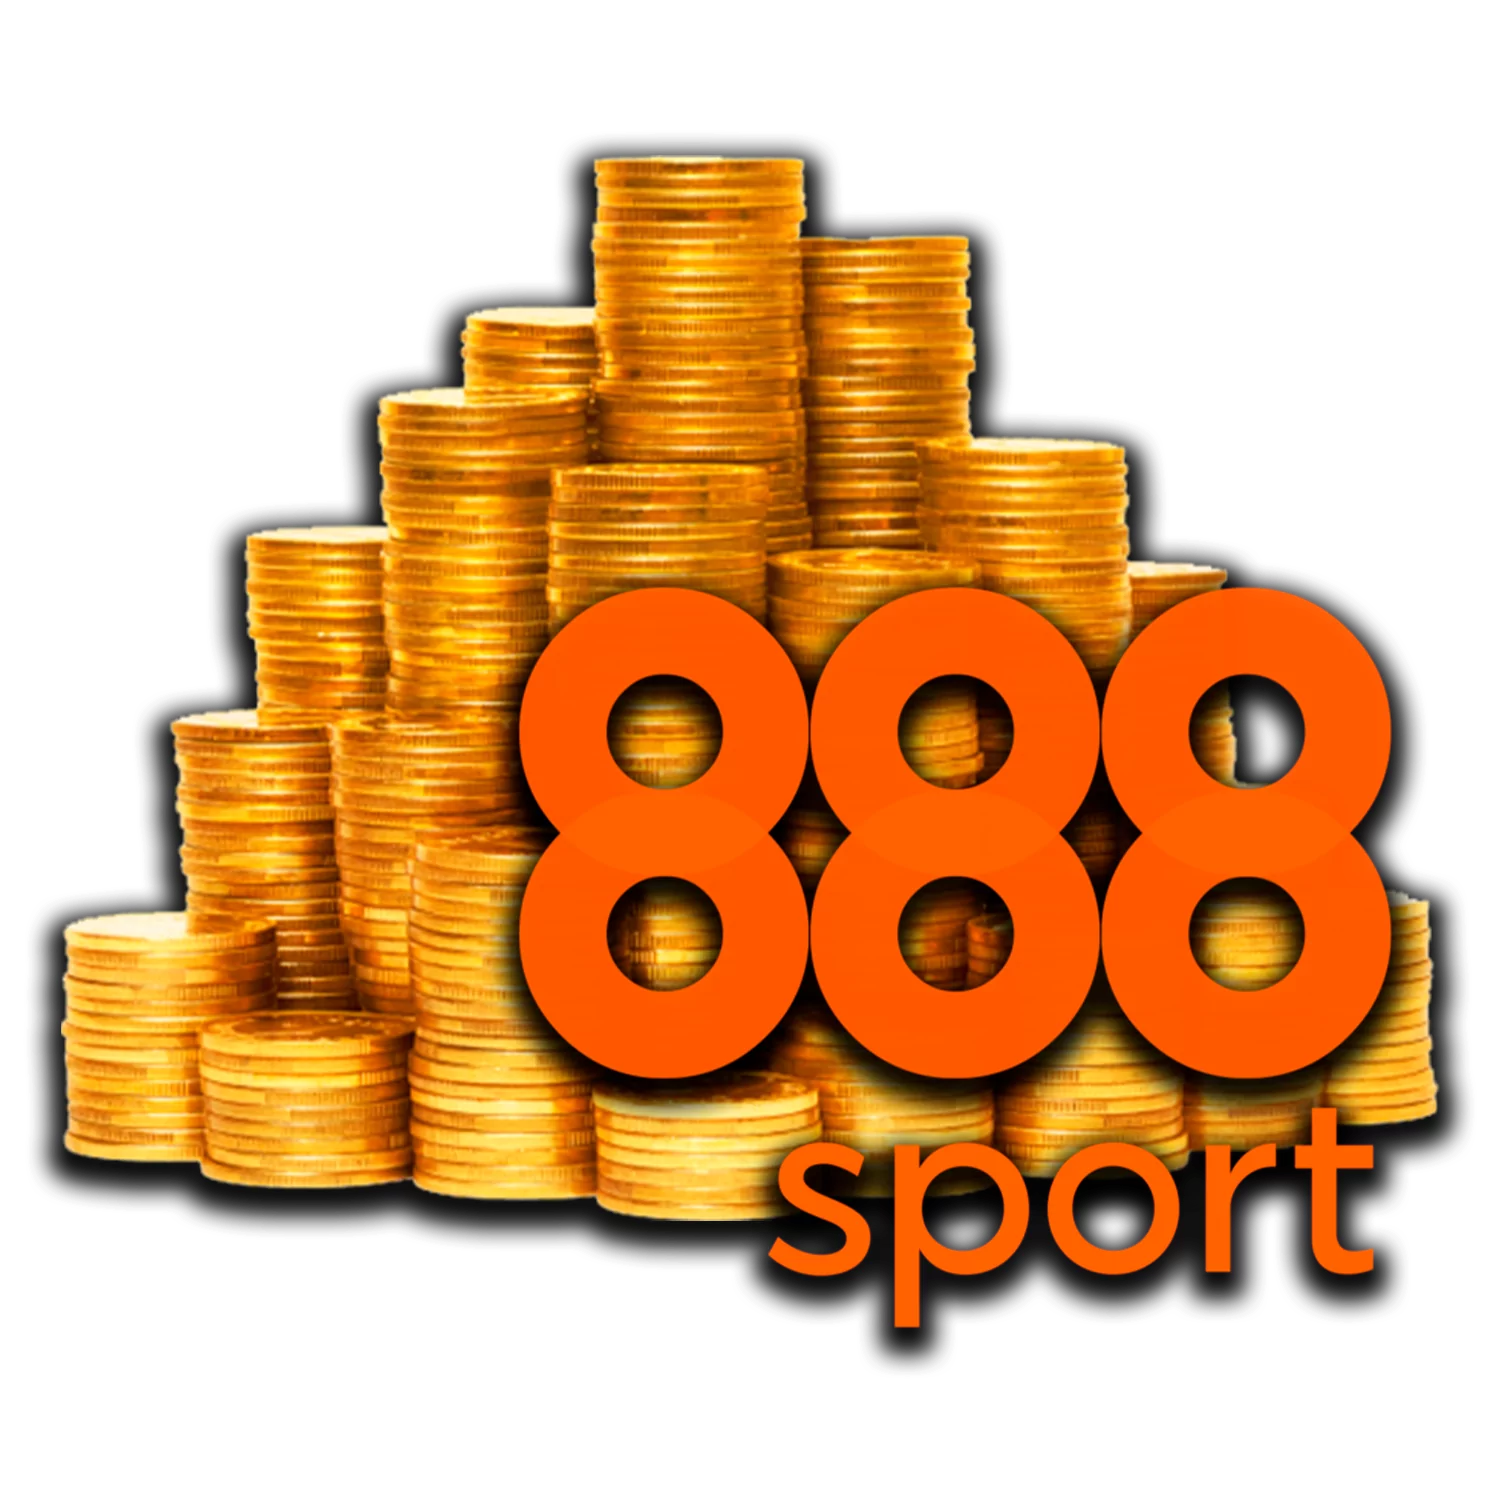 888sport offers a lot of differnet bonuses for users.